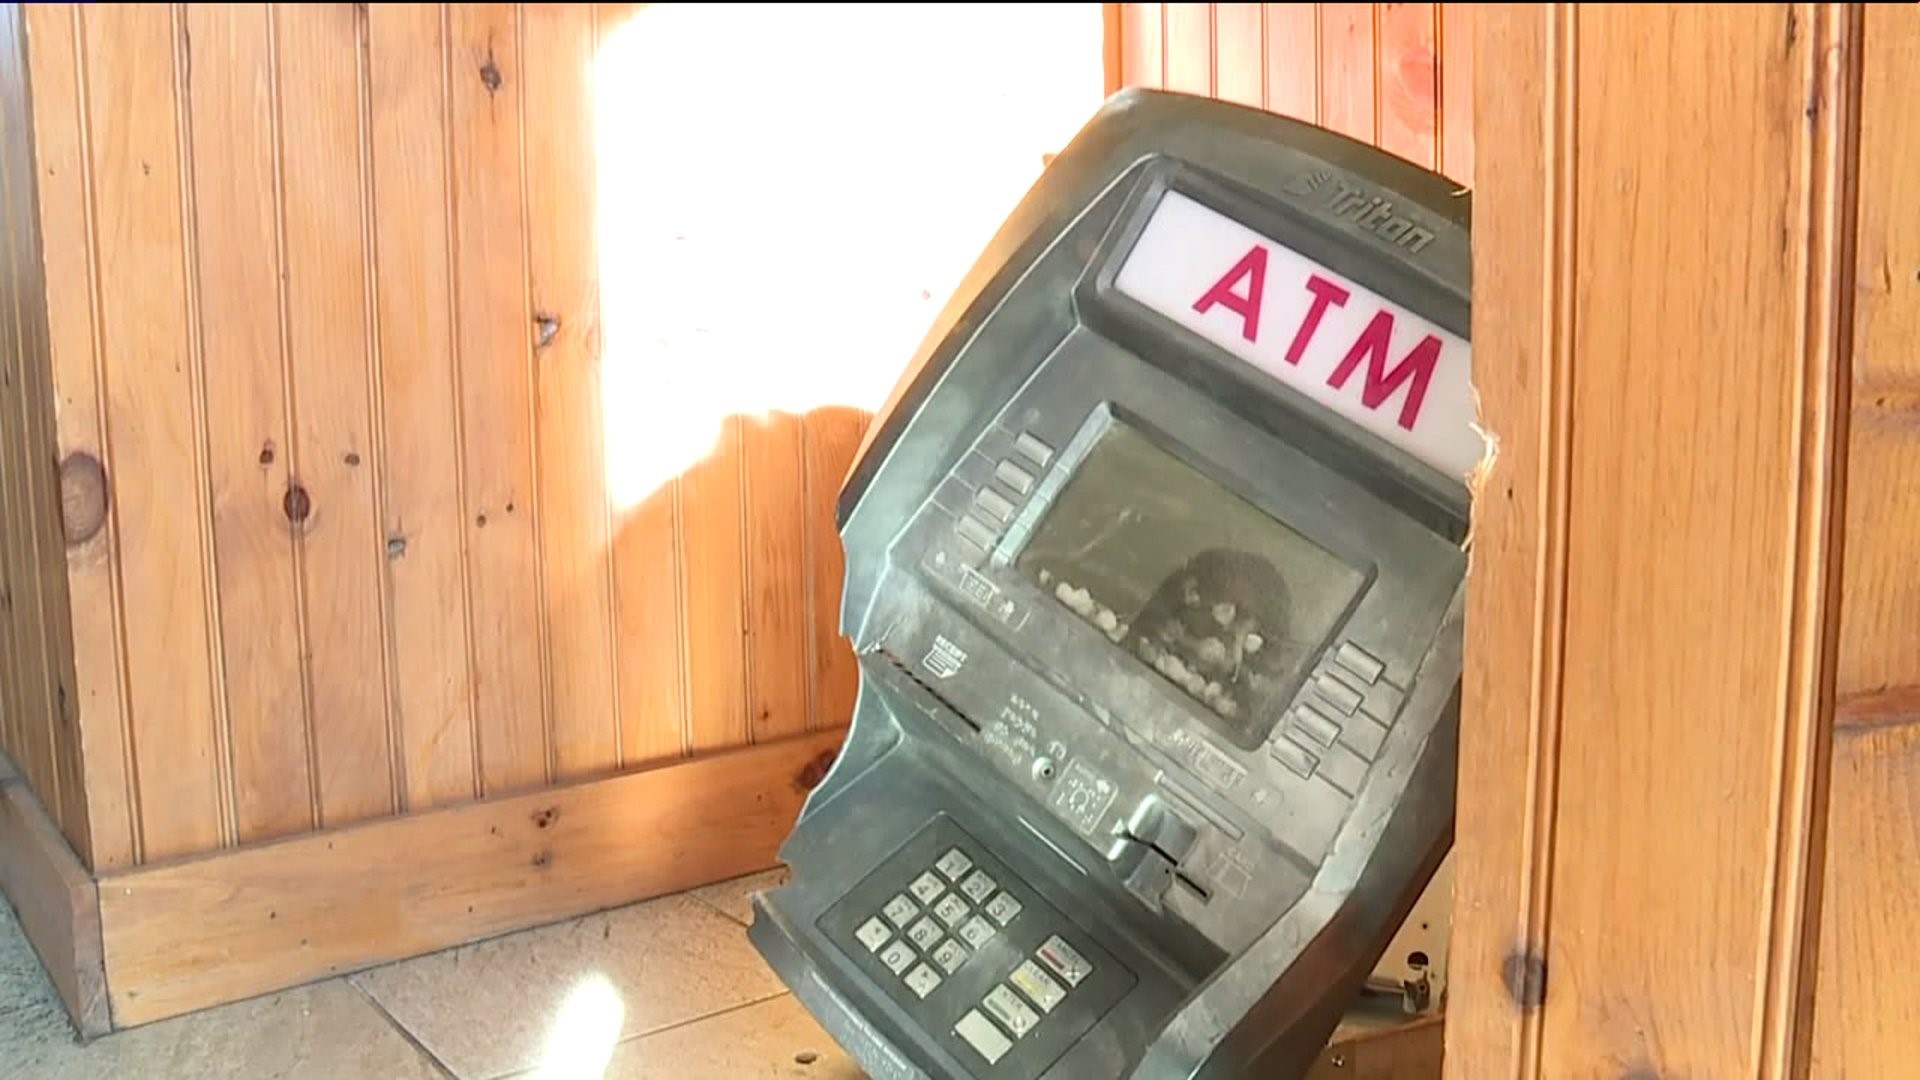 ATM Stolen from Pub